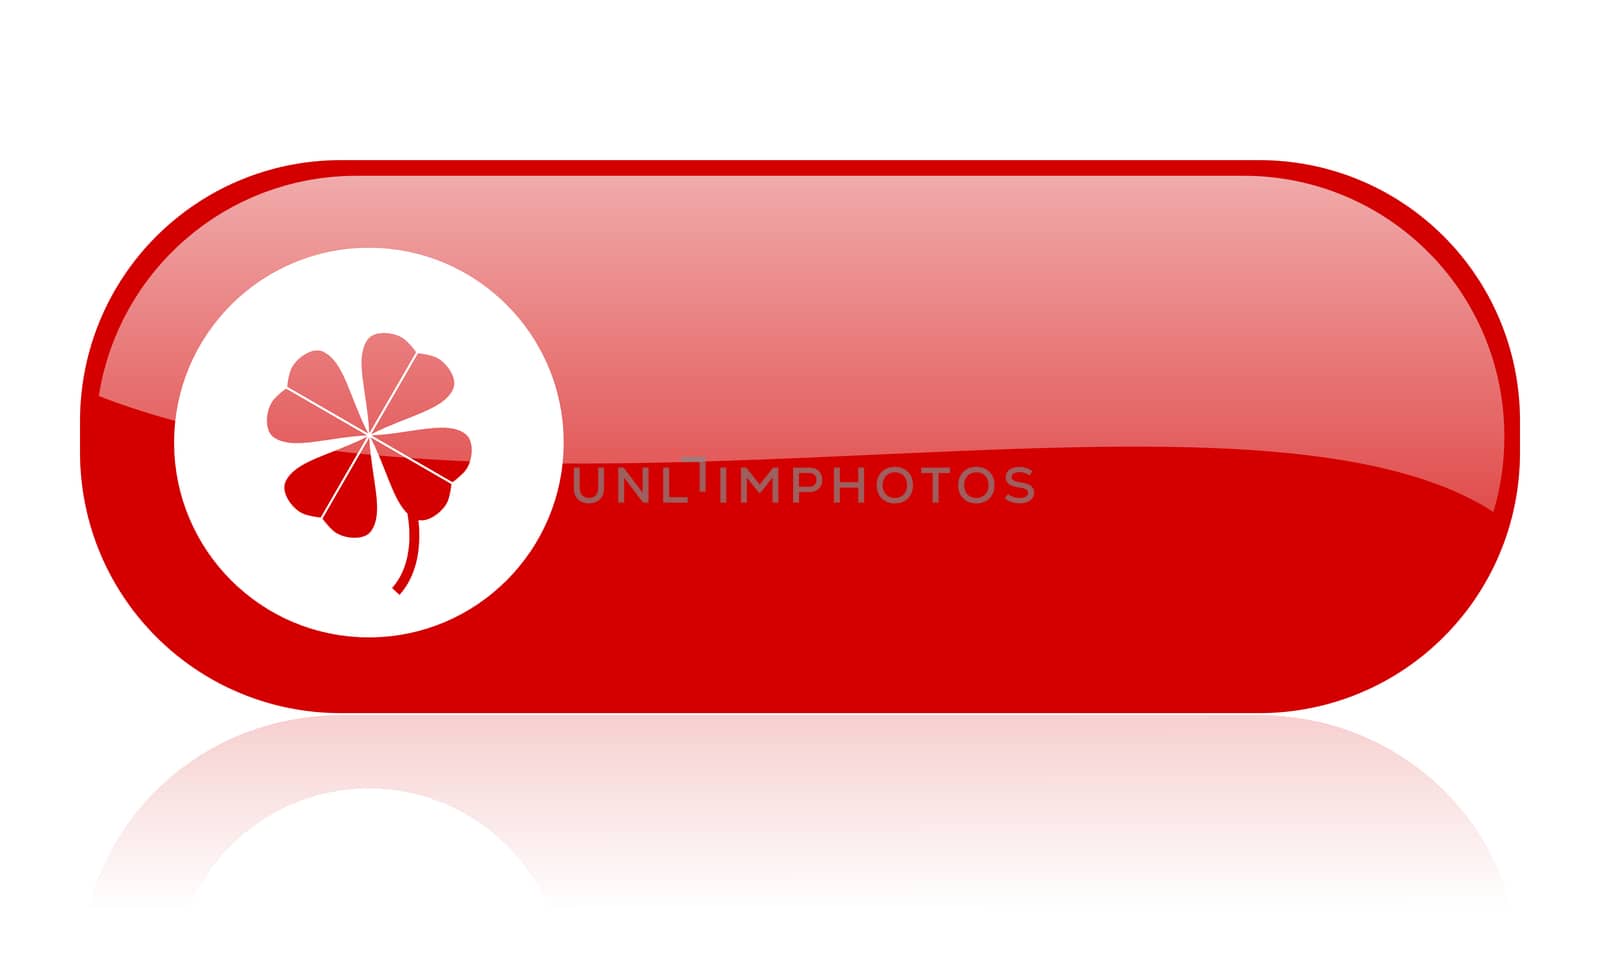 four-leaf clover red web glossy icon by alexwhite